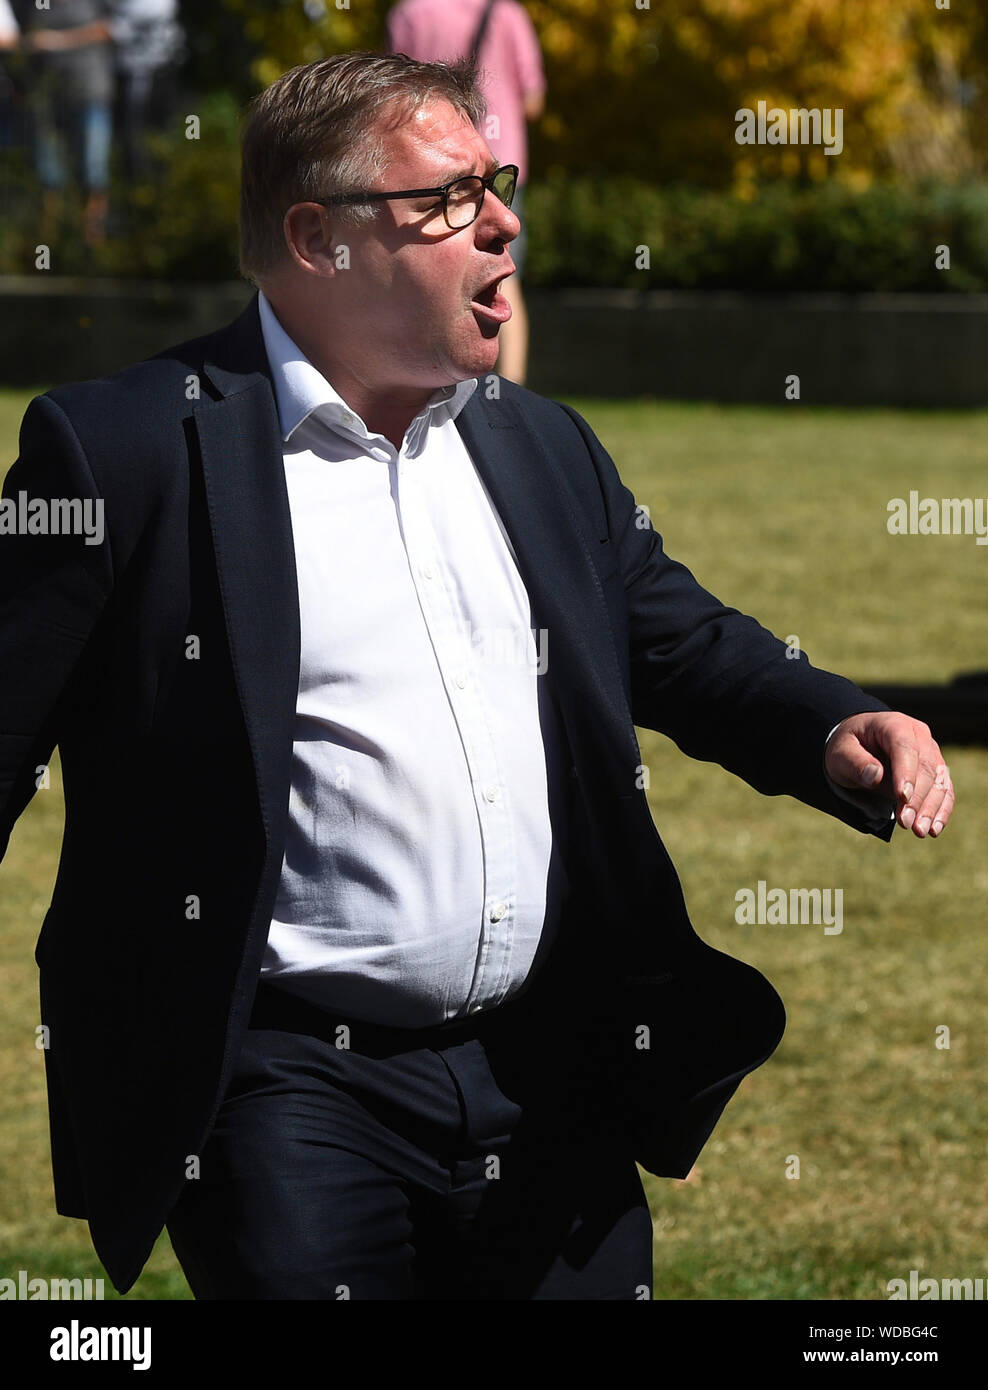 Conservative MP Mark Francois engages with protesters in Westminster, London. Stock Photo